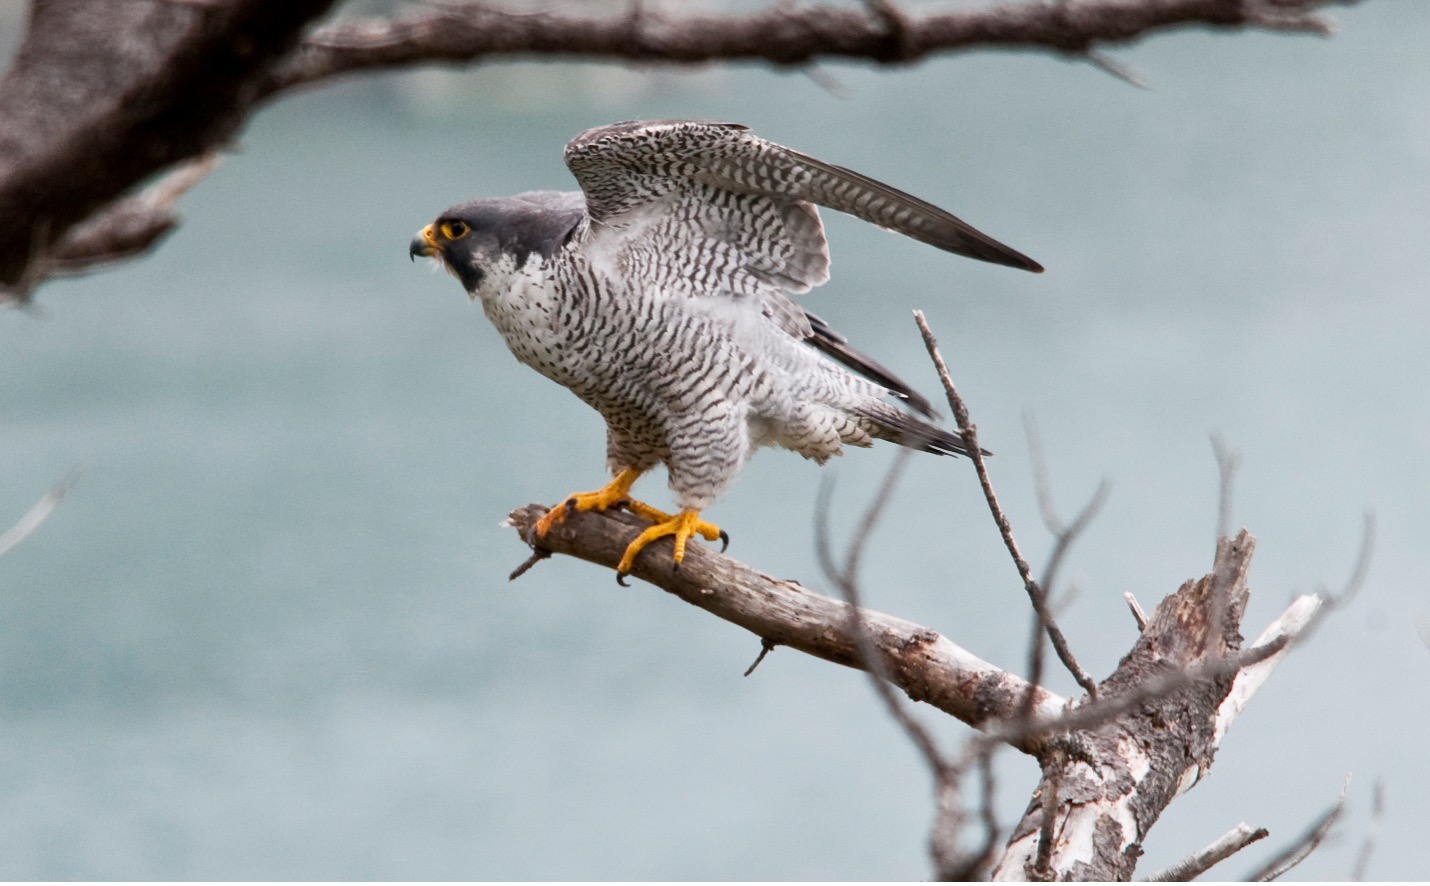 A peregrine falcon readies its wings while standing on a tree branch